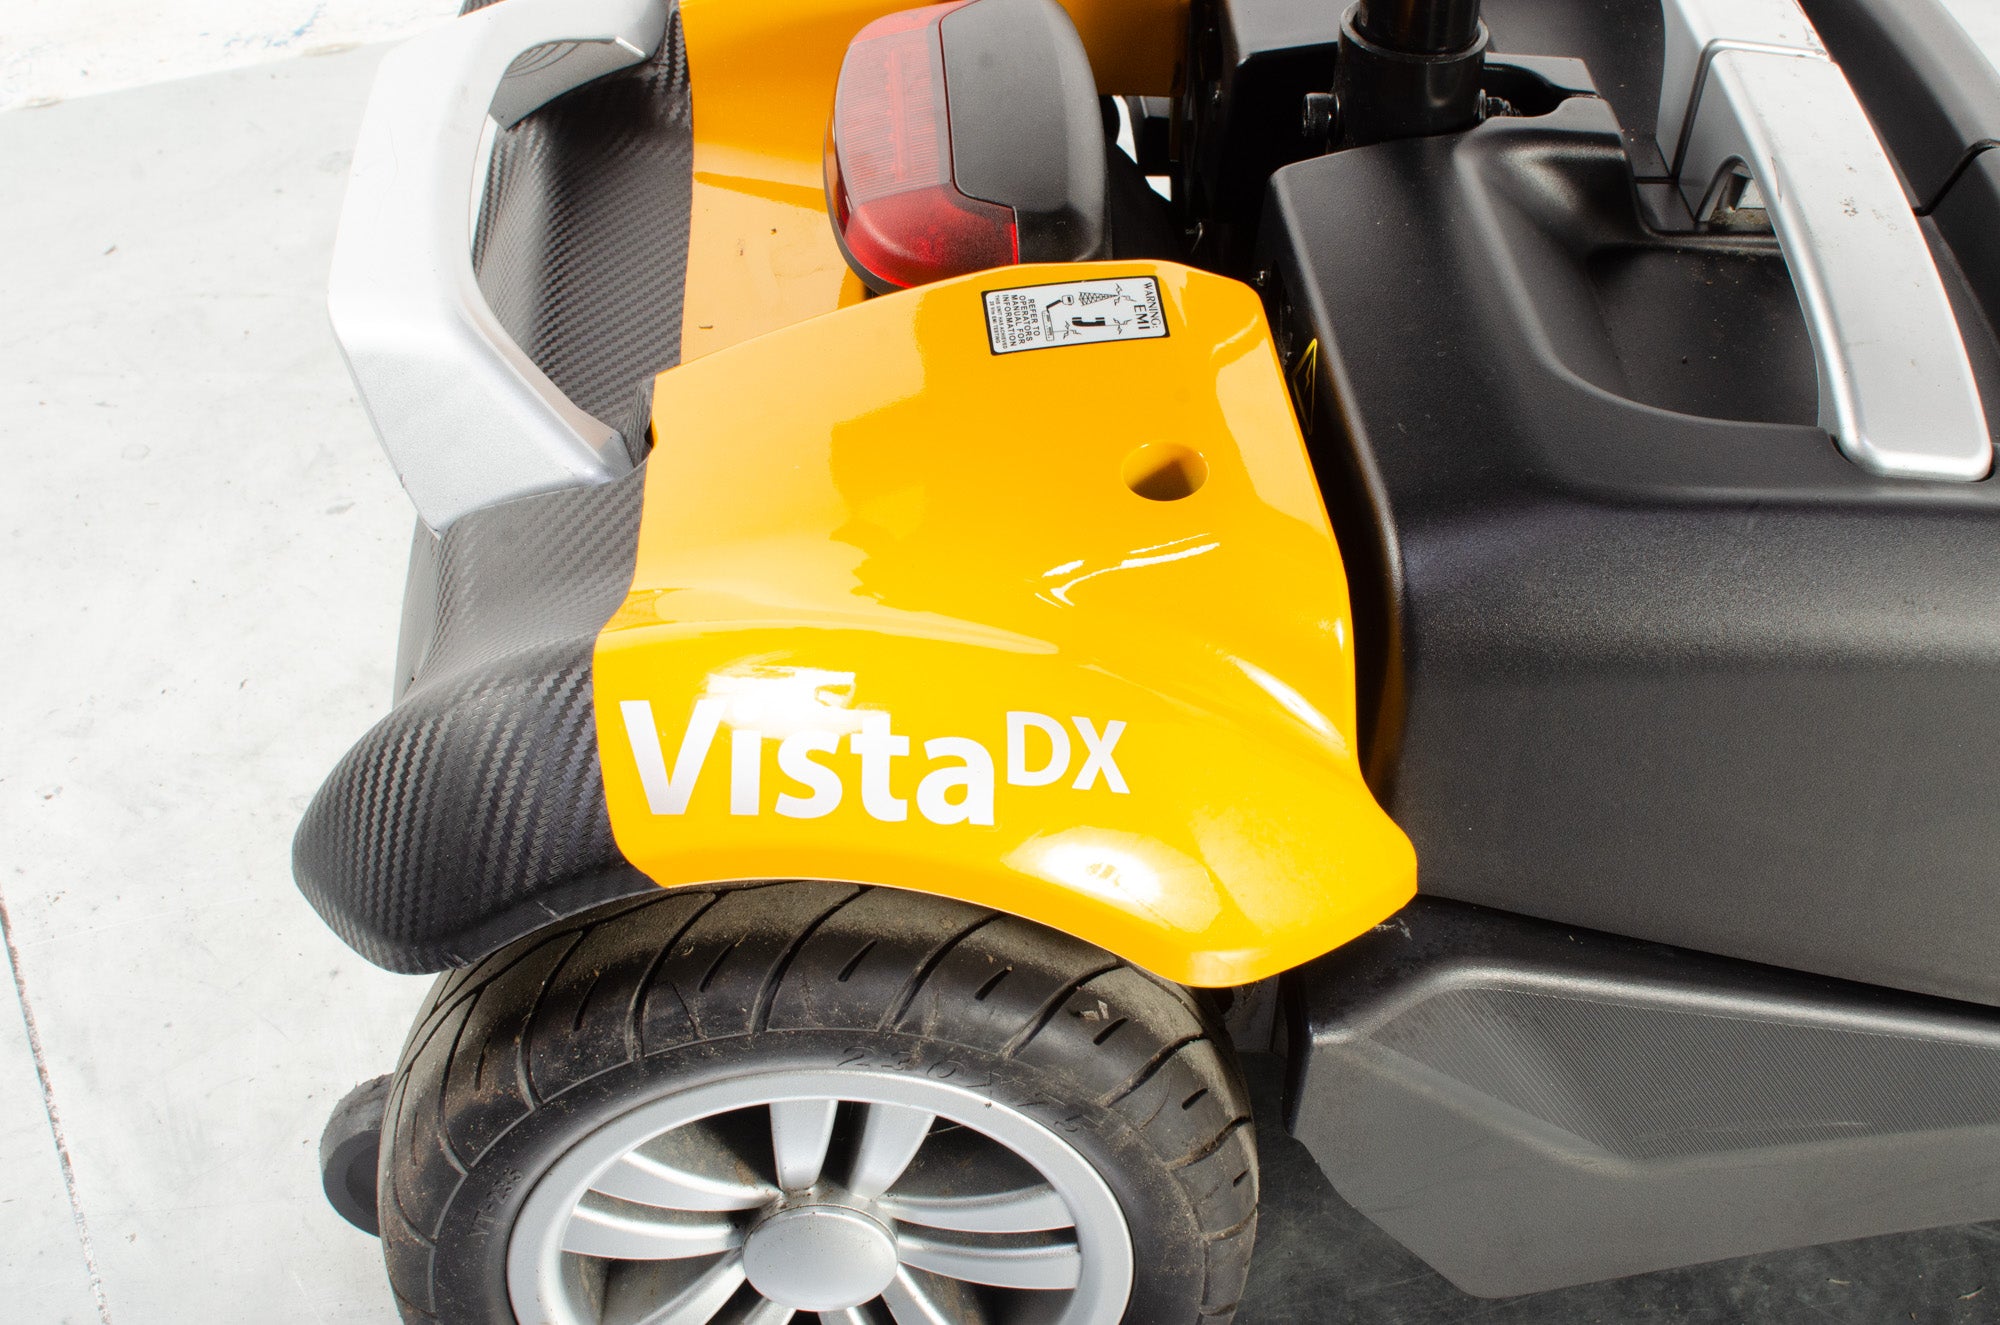 Rascal Vista DX Used Electric Mobility Scooter Transportable Heavy Duty Folding Suspension